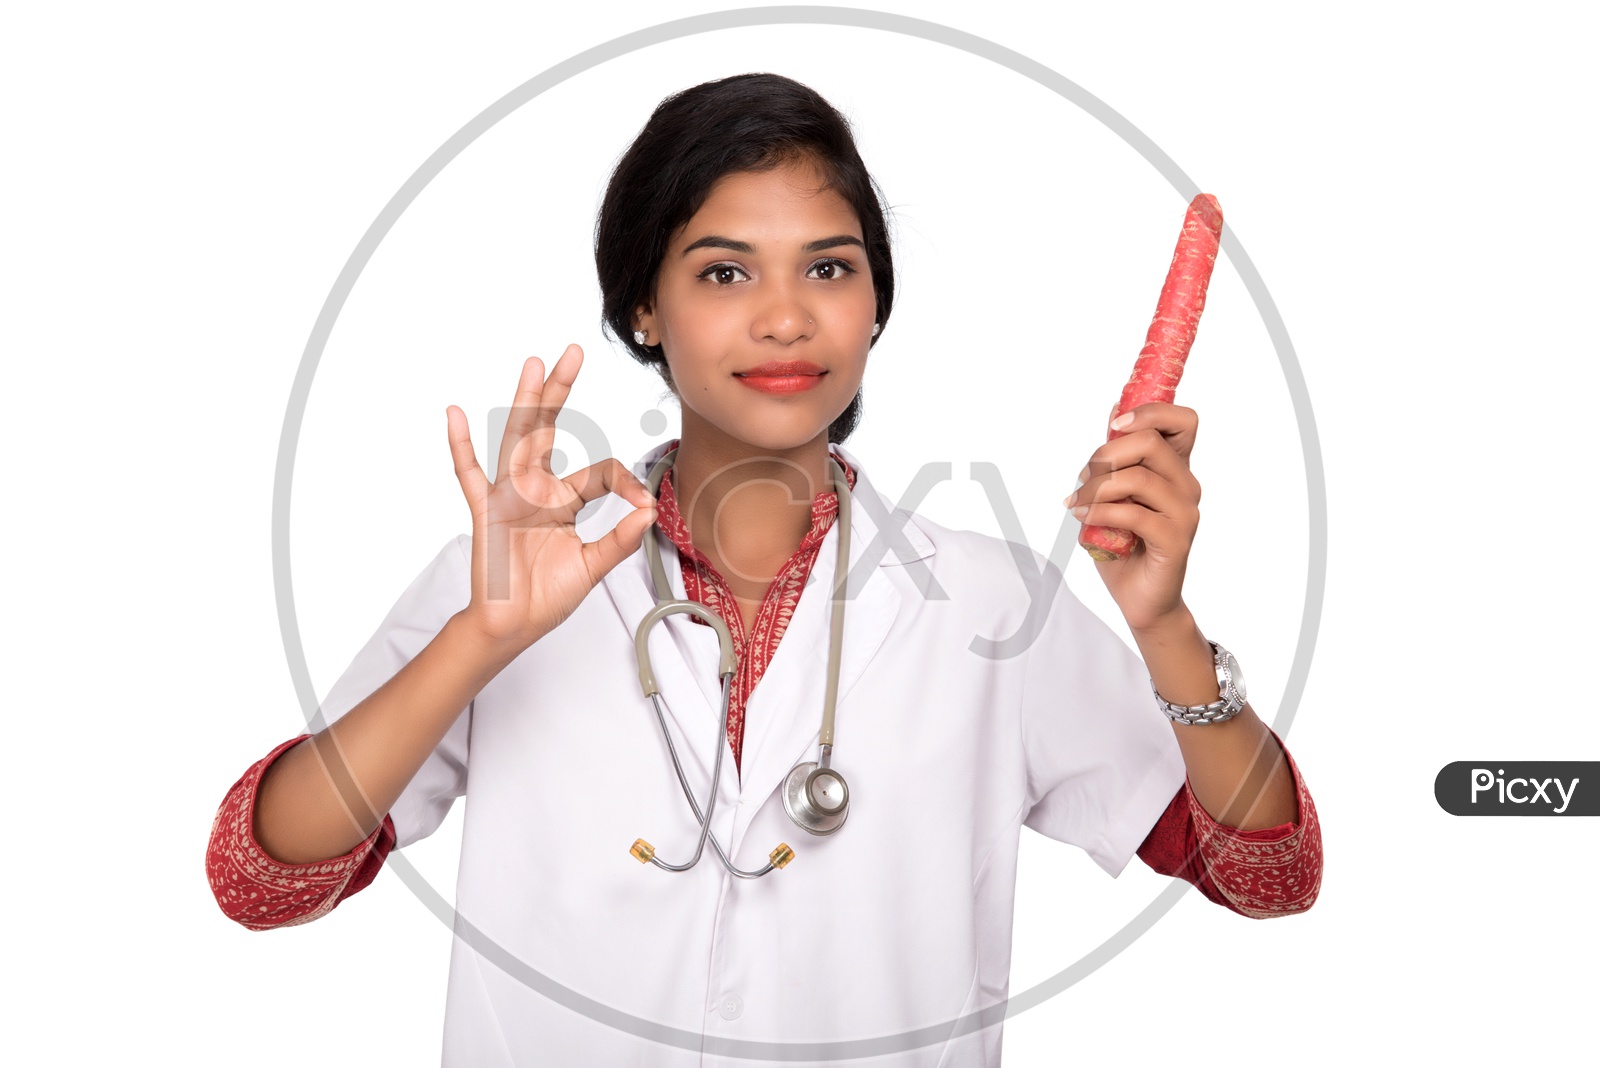 Indian Female Doctor holding carrot making a super sign